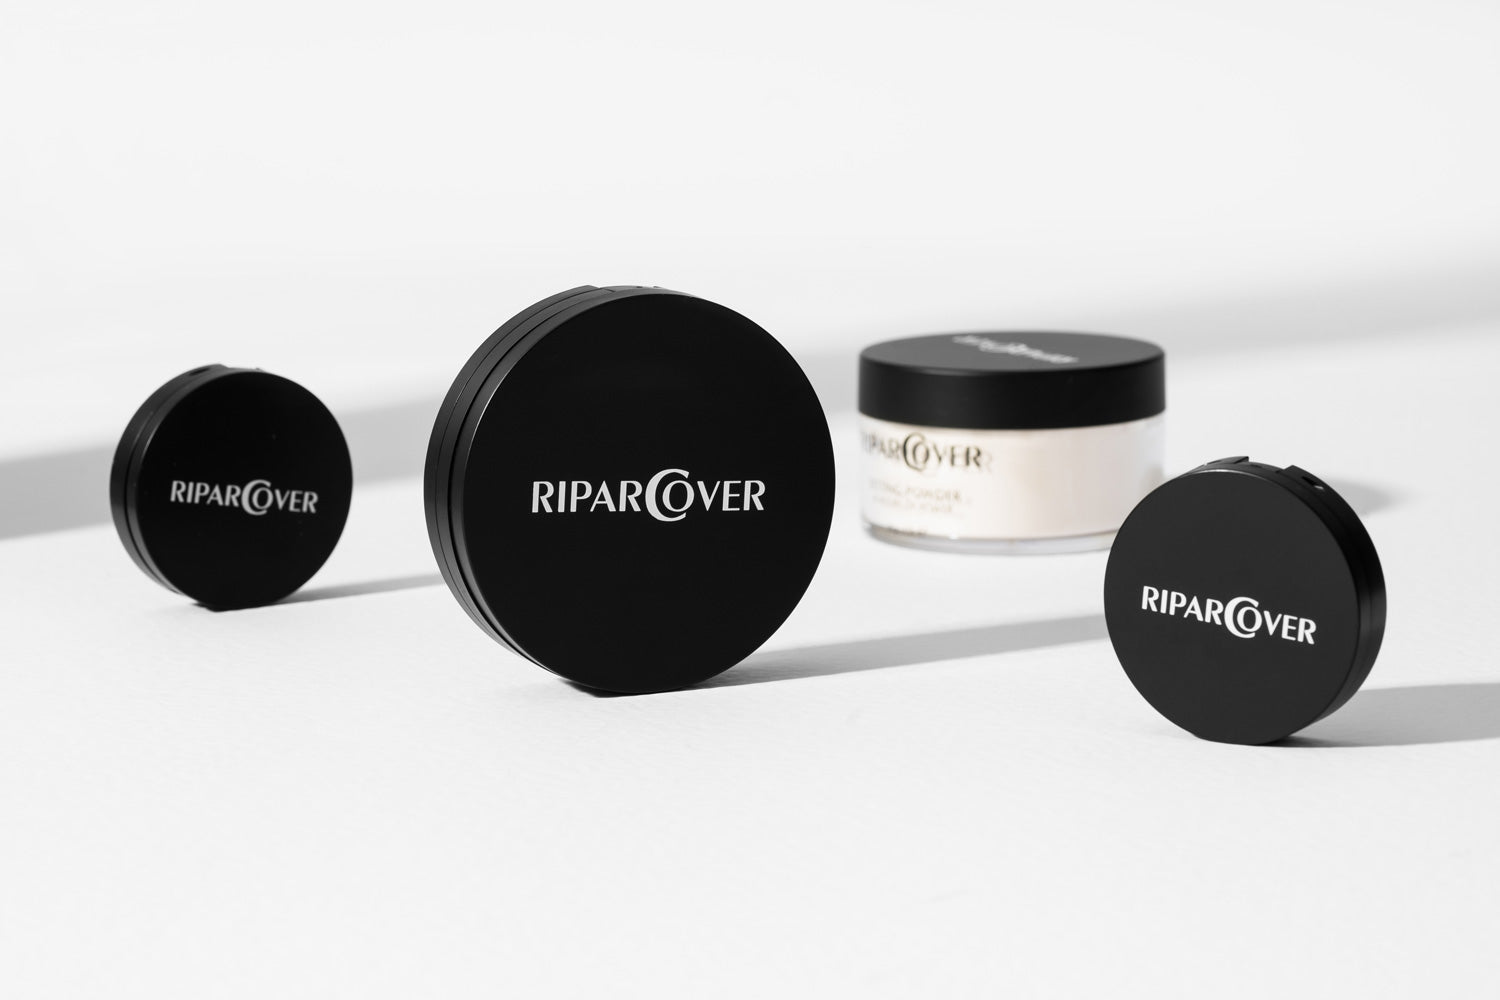 RIPARCOVER